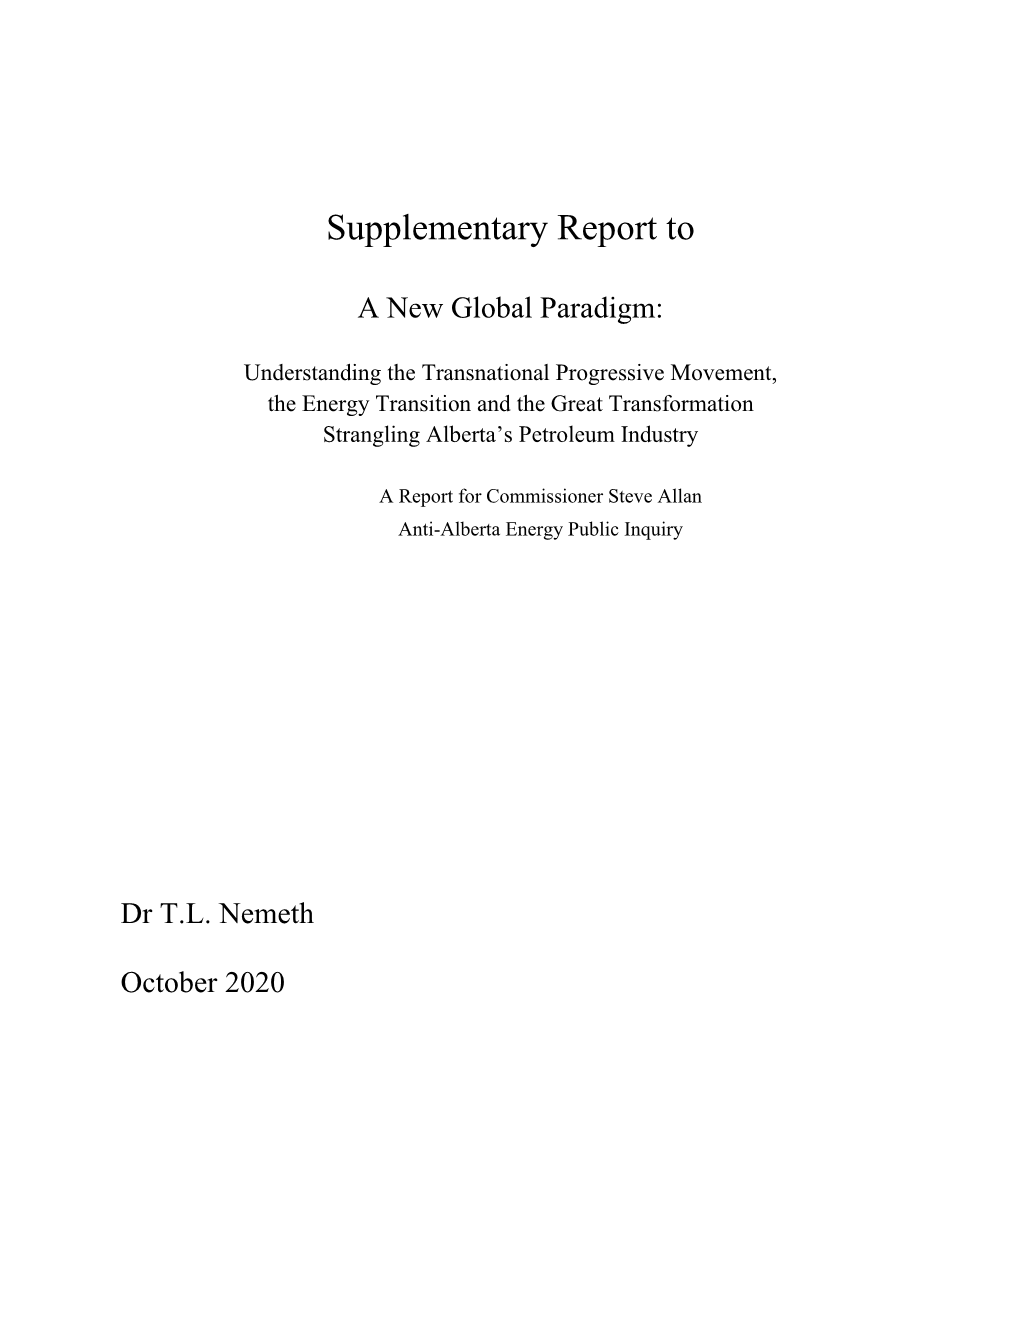 Supplementary Report To